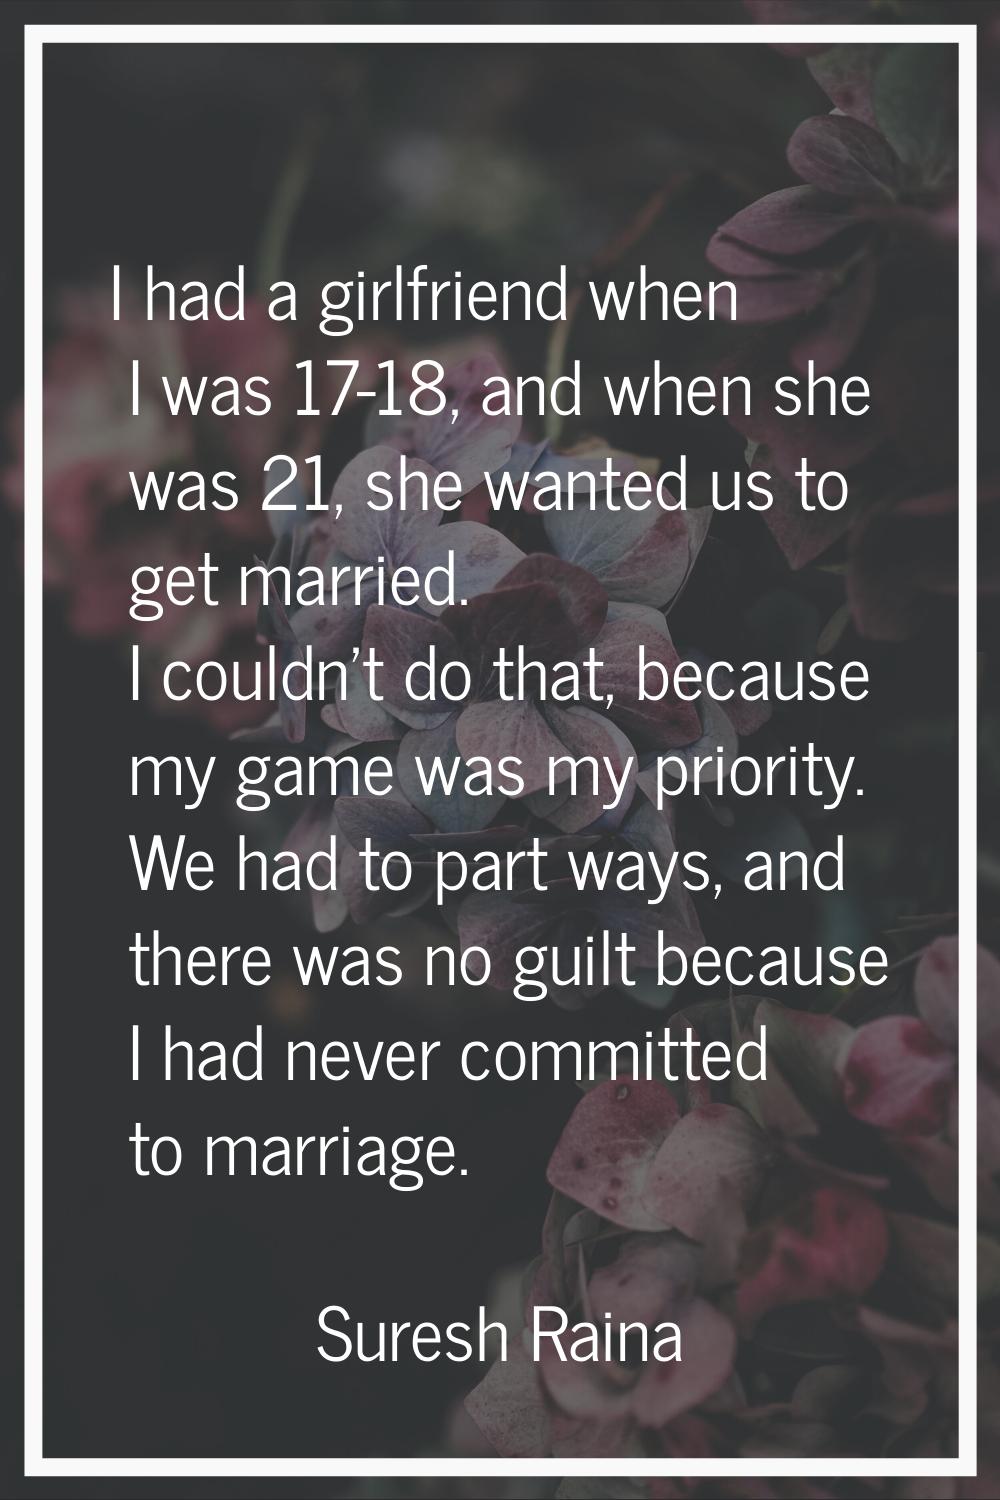 I had a girlfriend when I was 17-18, and when she was 21, she wanted us to get married. I couldn't 